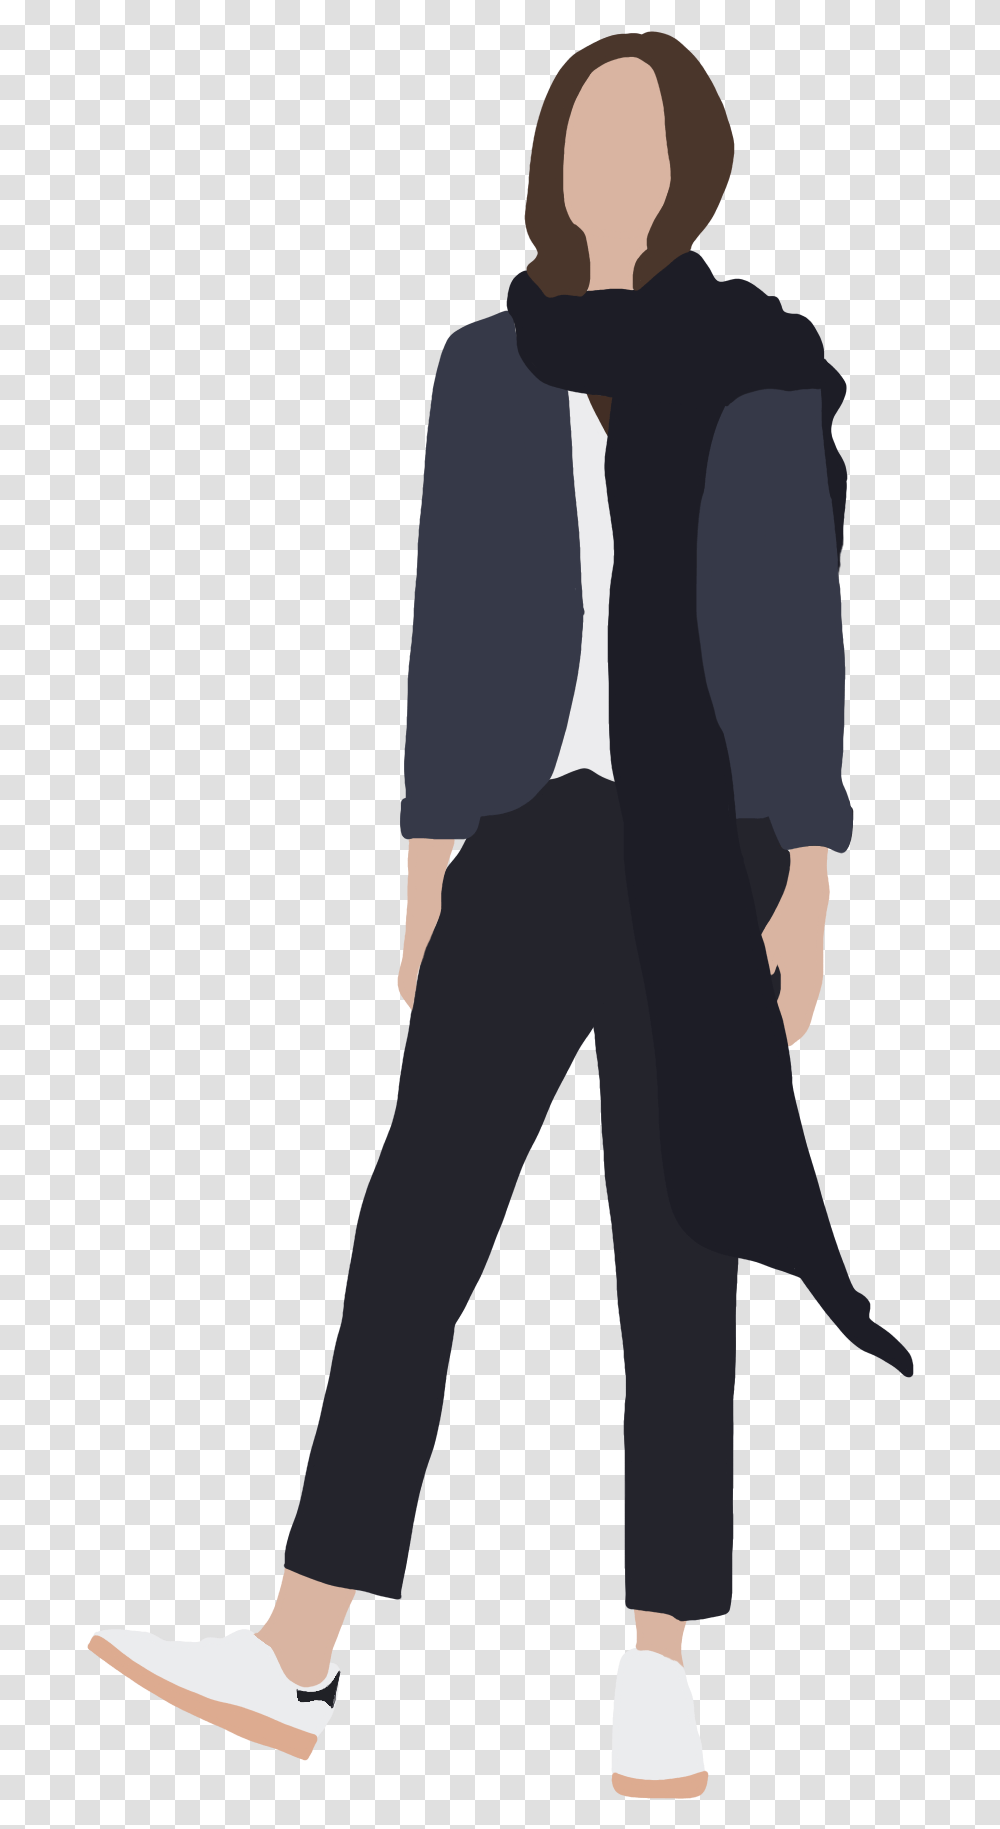 People Flat Illustration People Photoshop Architecture, Clothing, Person, Sleeve, Suit Transparent Png